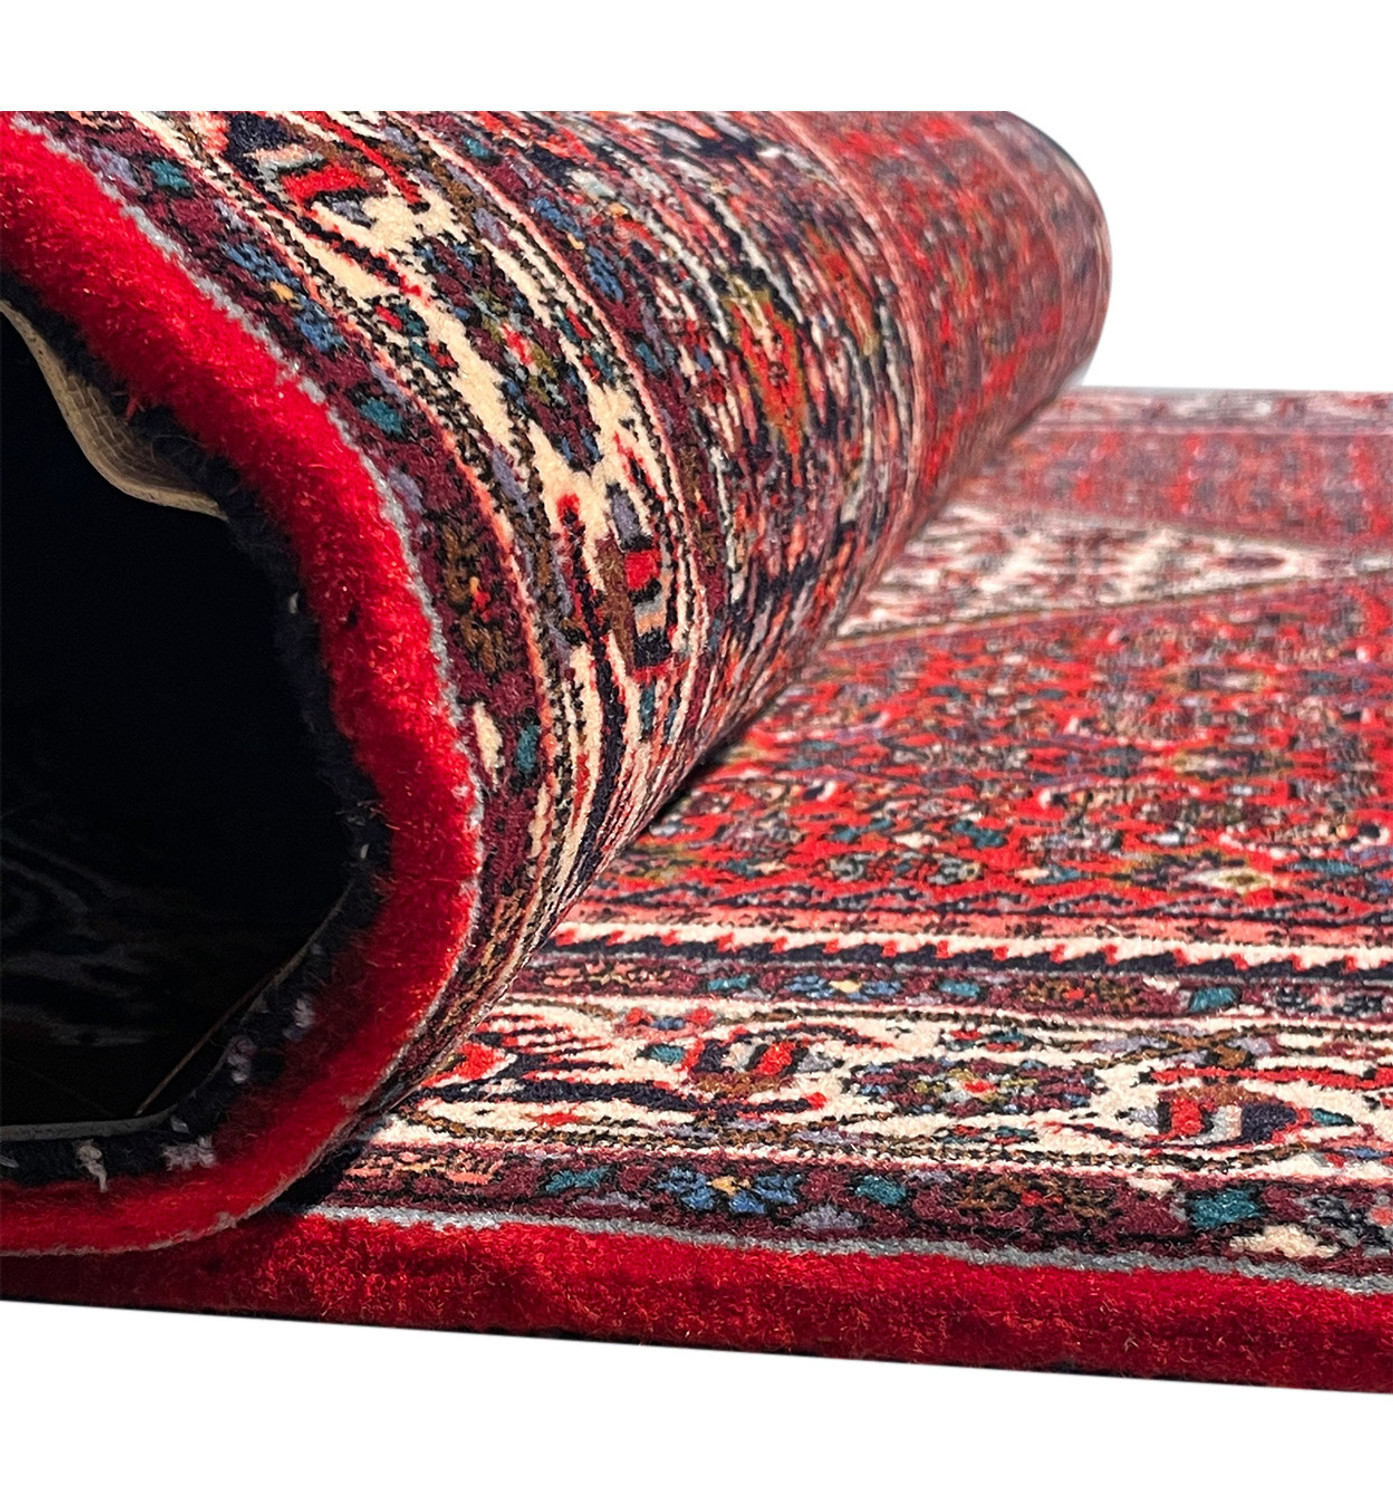 Rolled Persian Bijar rug, with a glimpse of the pattern, highlighting the thickness and quality of the rug.